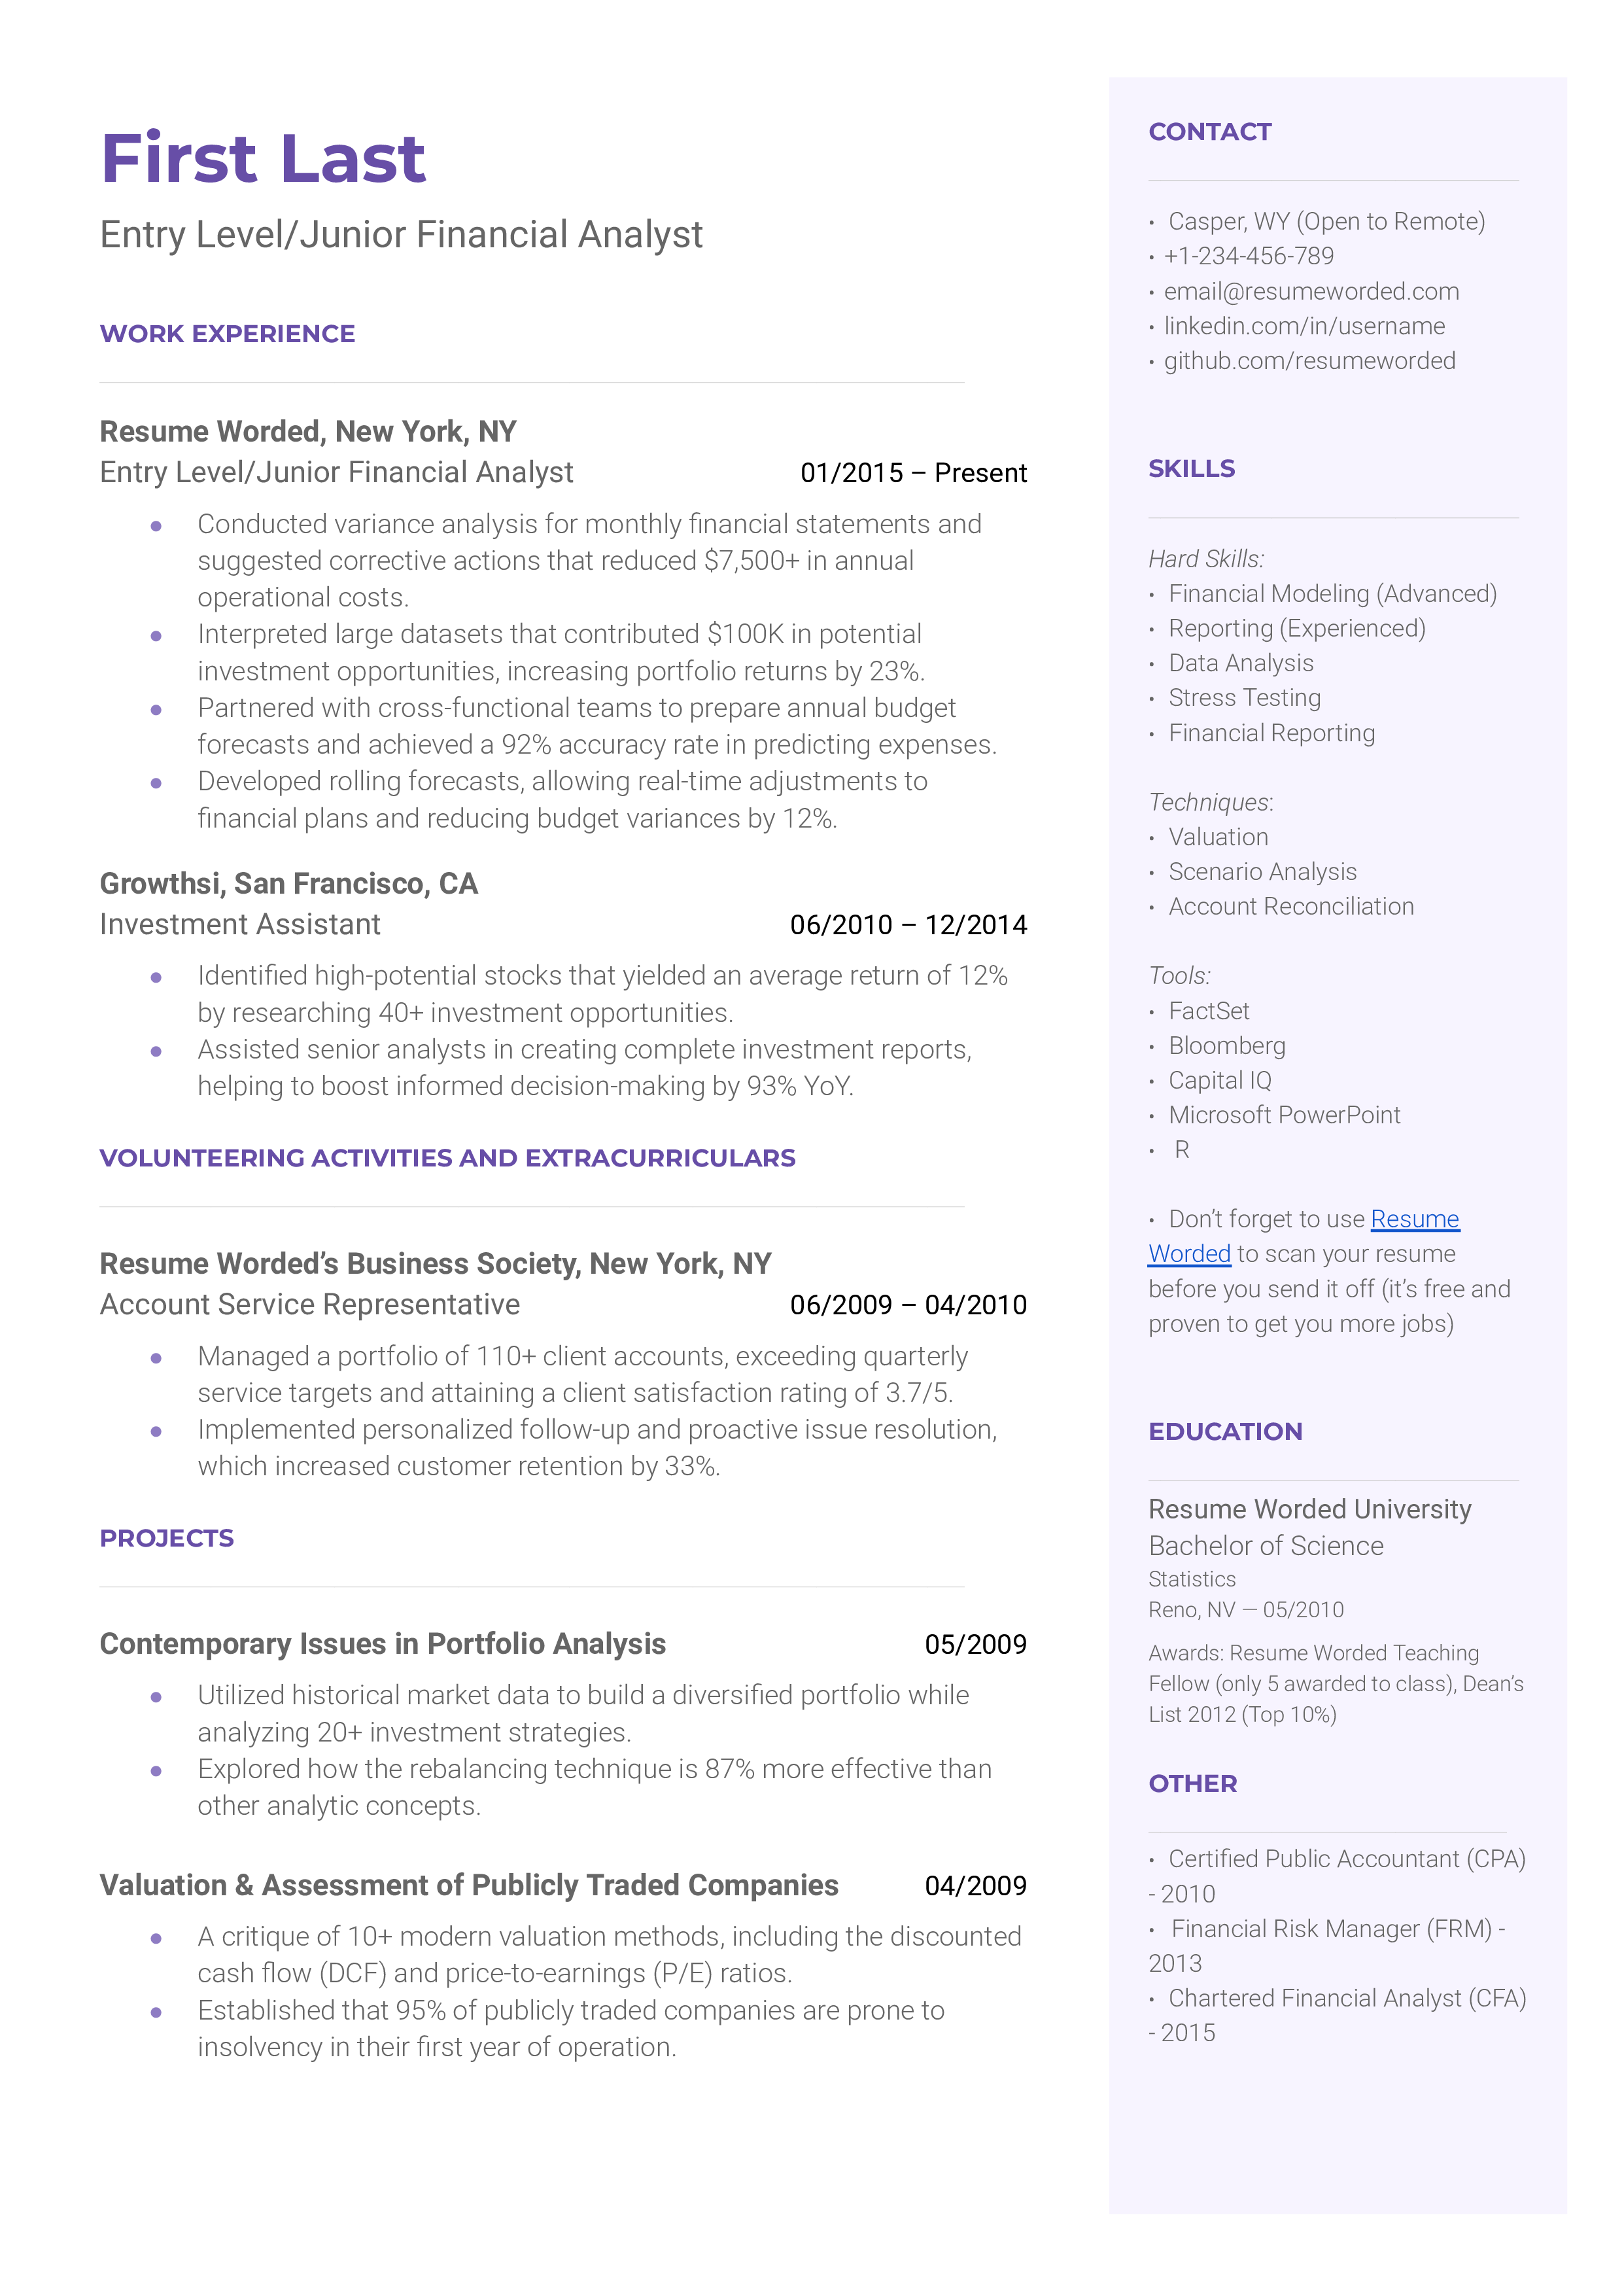 A resume screenshot highlighting skills and experience relevant for an Entry Level/Junior Financial Analyst role.